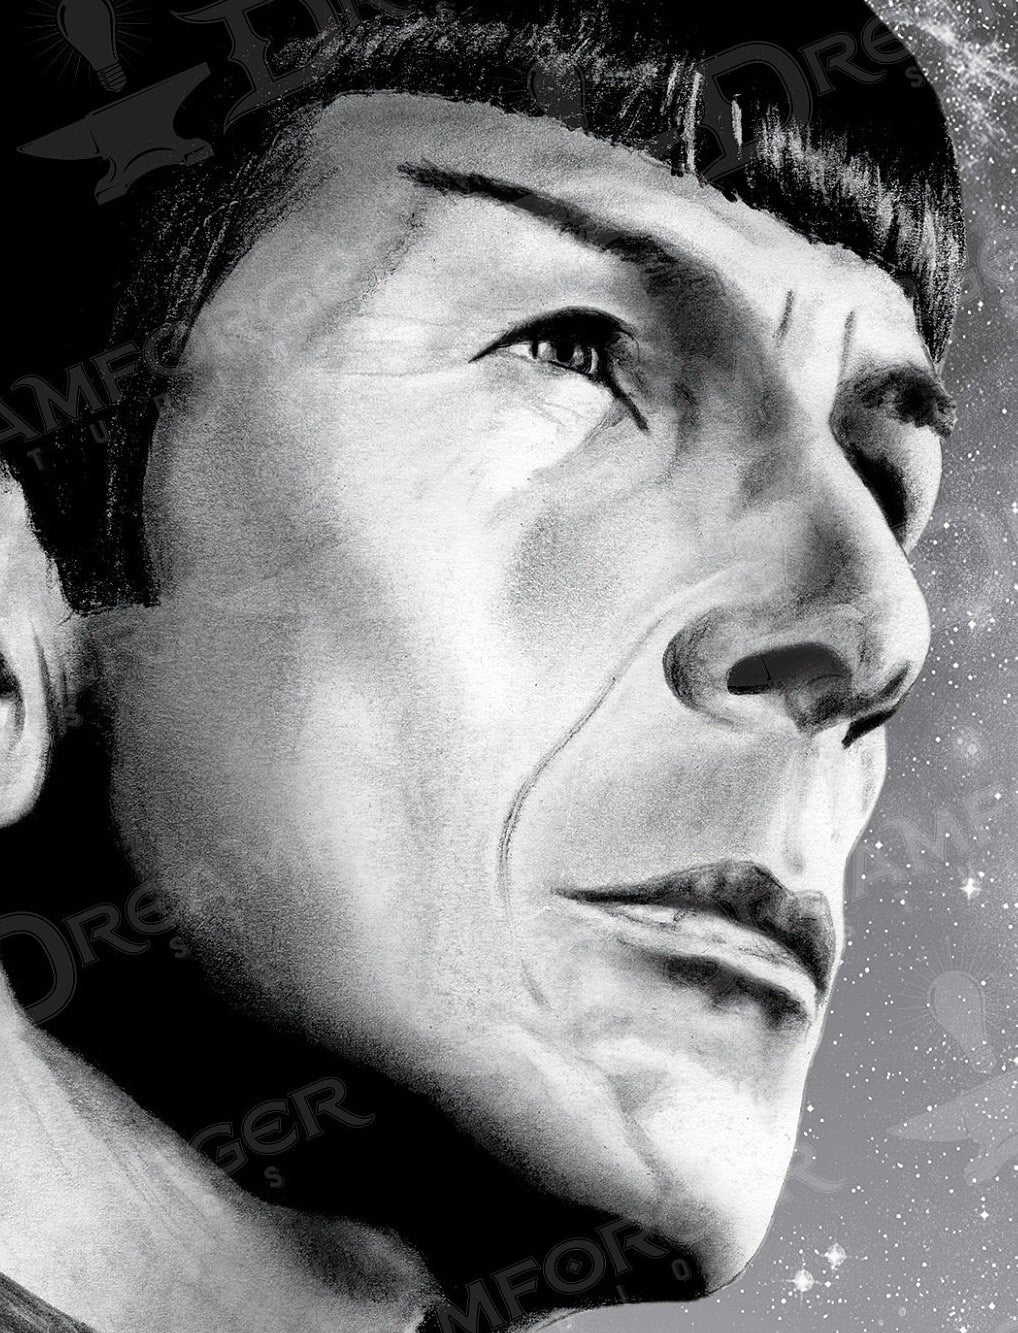 Limited Edition "Spock • Chief Science Officer of the U.S.S. Enterprise" Portrait Art